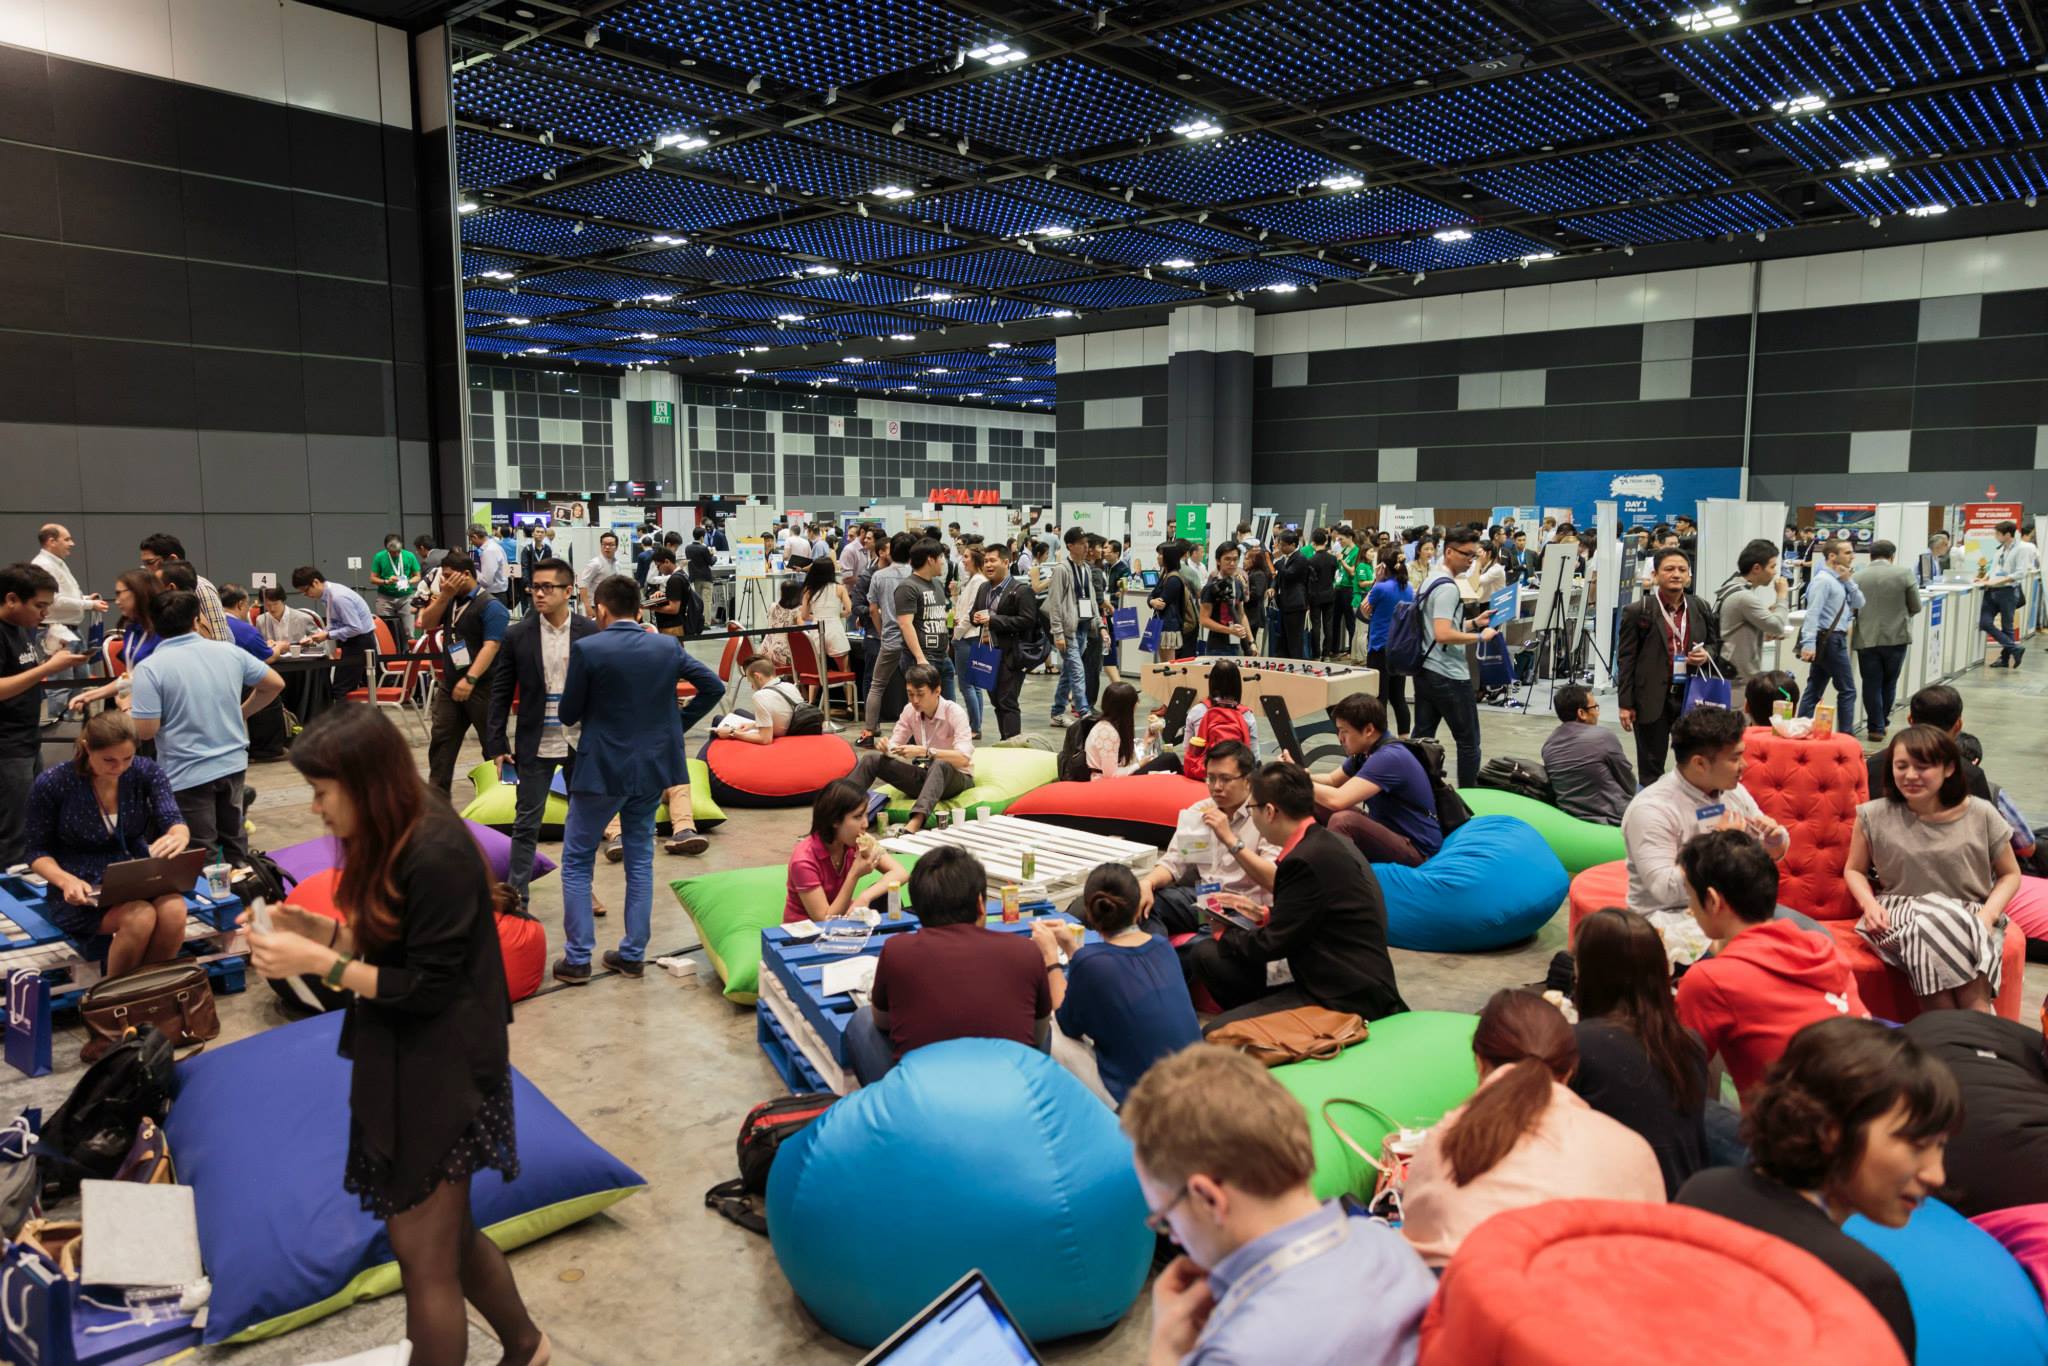 Five lessons from exhibiting at a tech conference